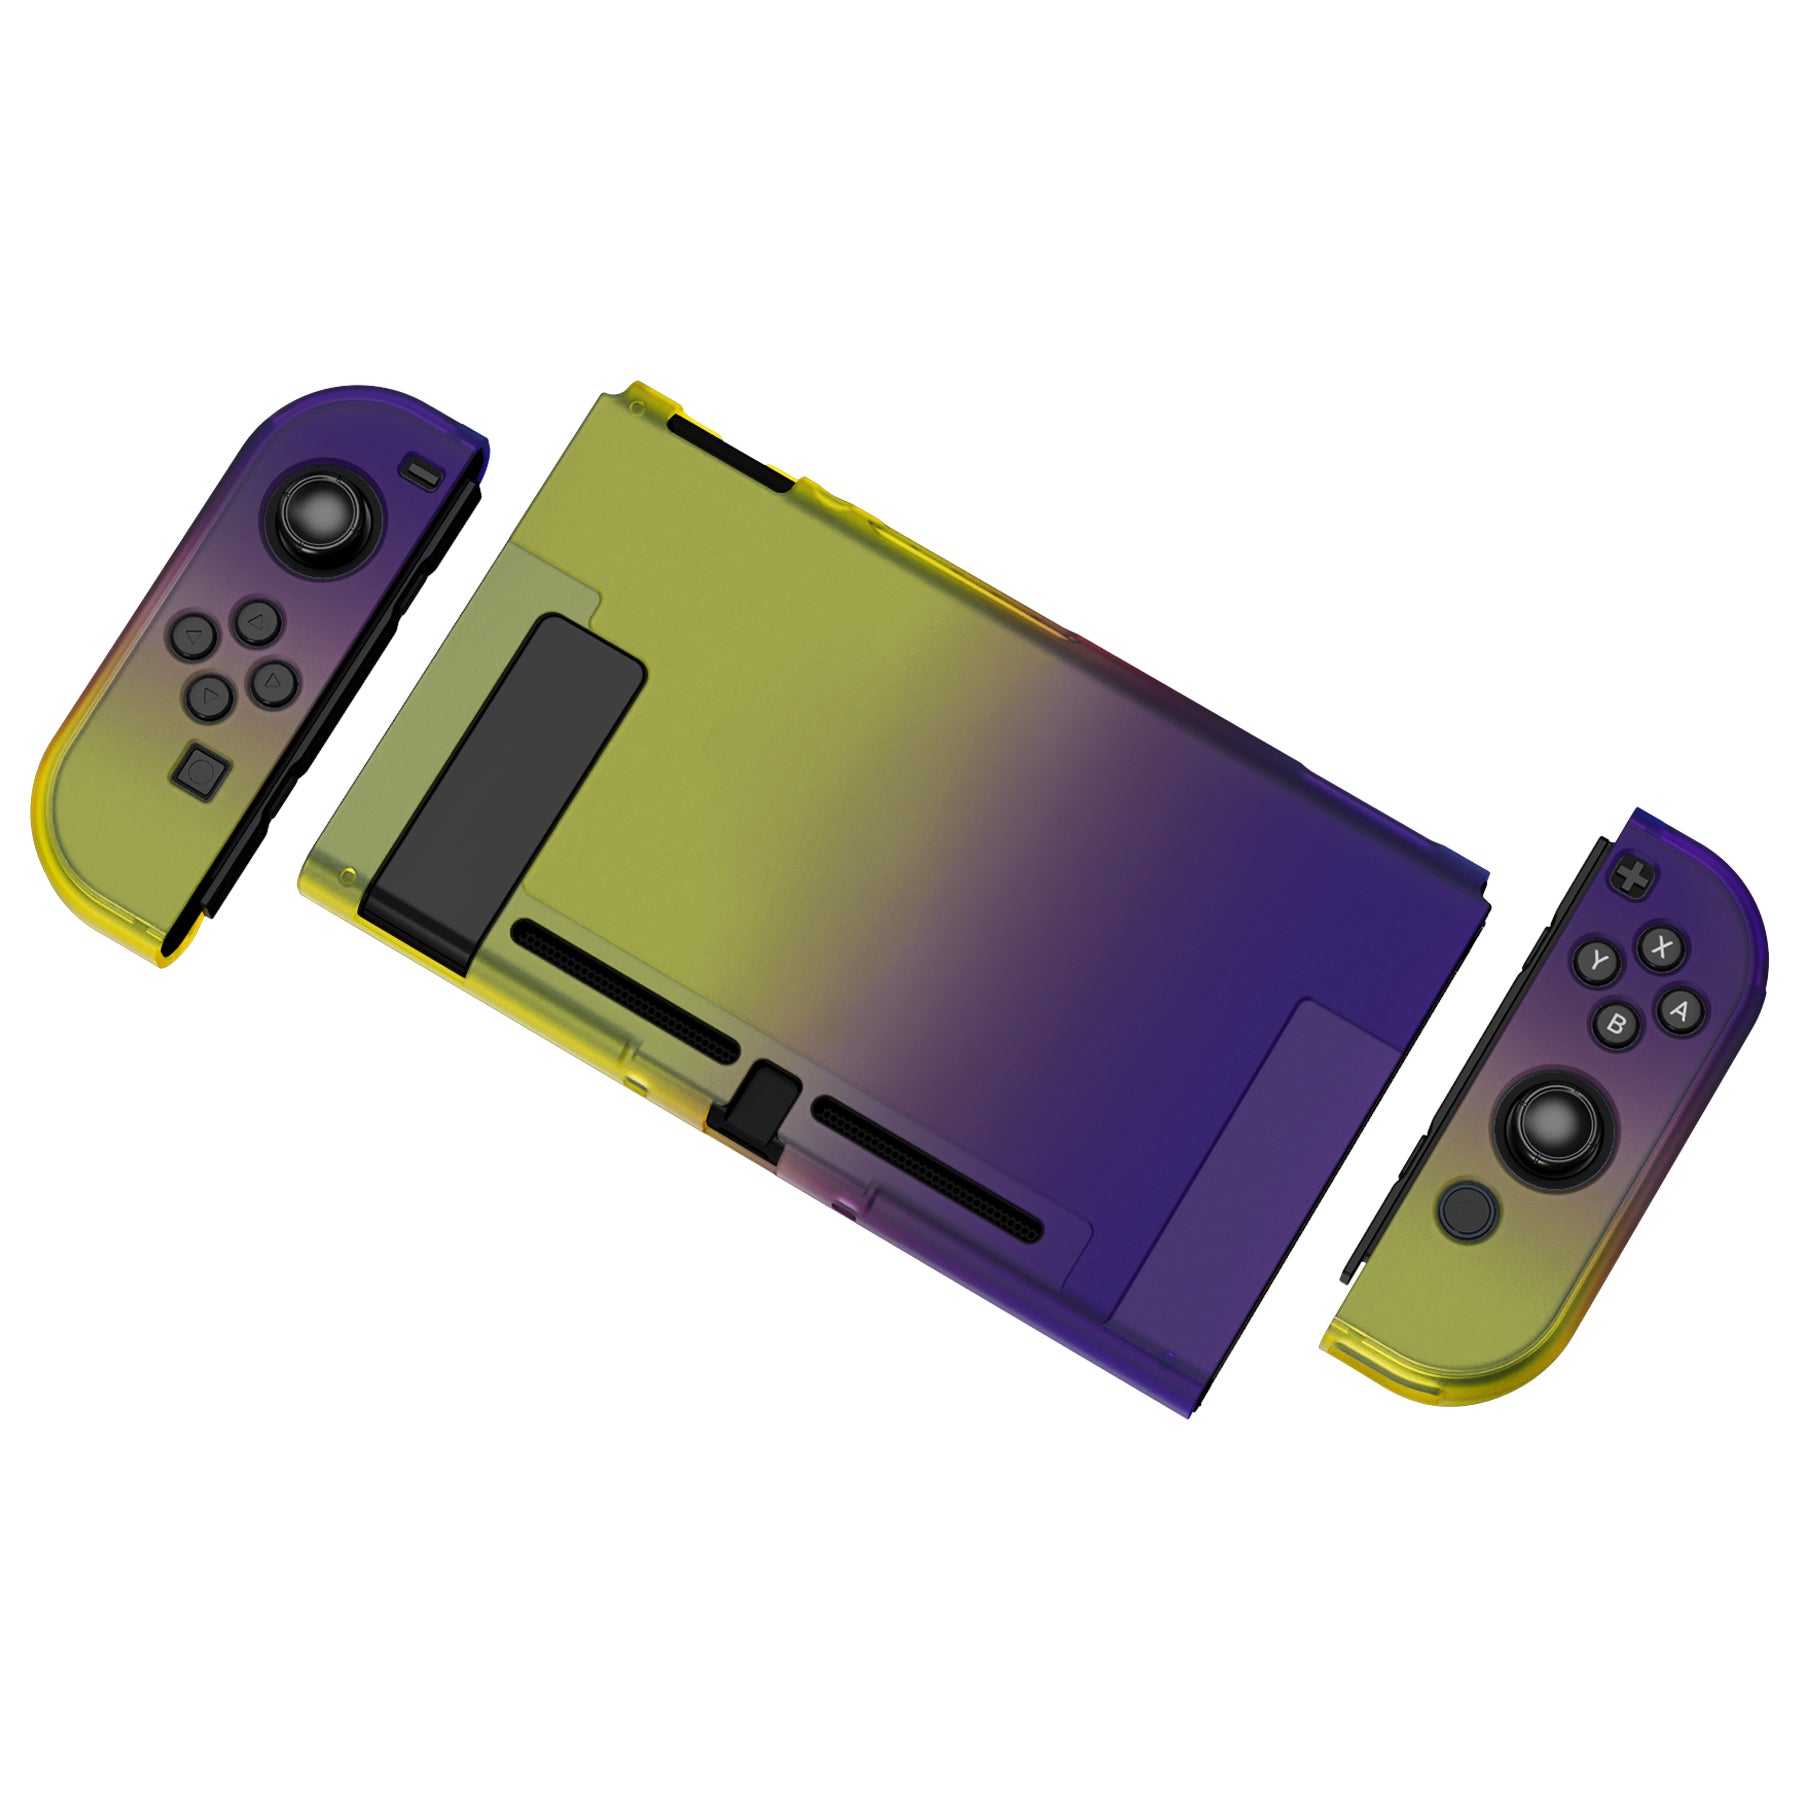 PlayVital Gradient Purple Yellow Back Cover for Nintendo Switch Console, NS Joycon Handheld Controller Separable Protector Hard Shell, Soft Touch Customized Dockable Protective Case for Nintendo Switch - NTP346 PlayVital